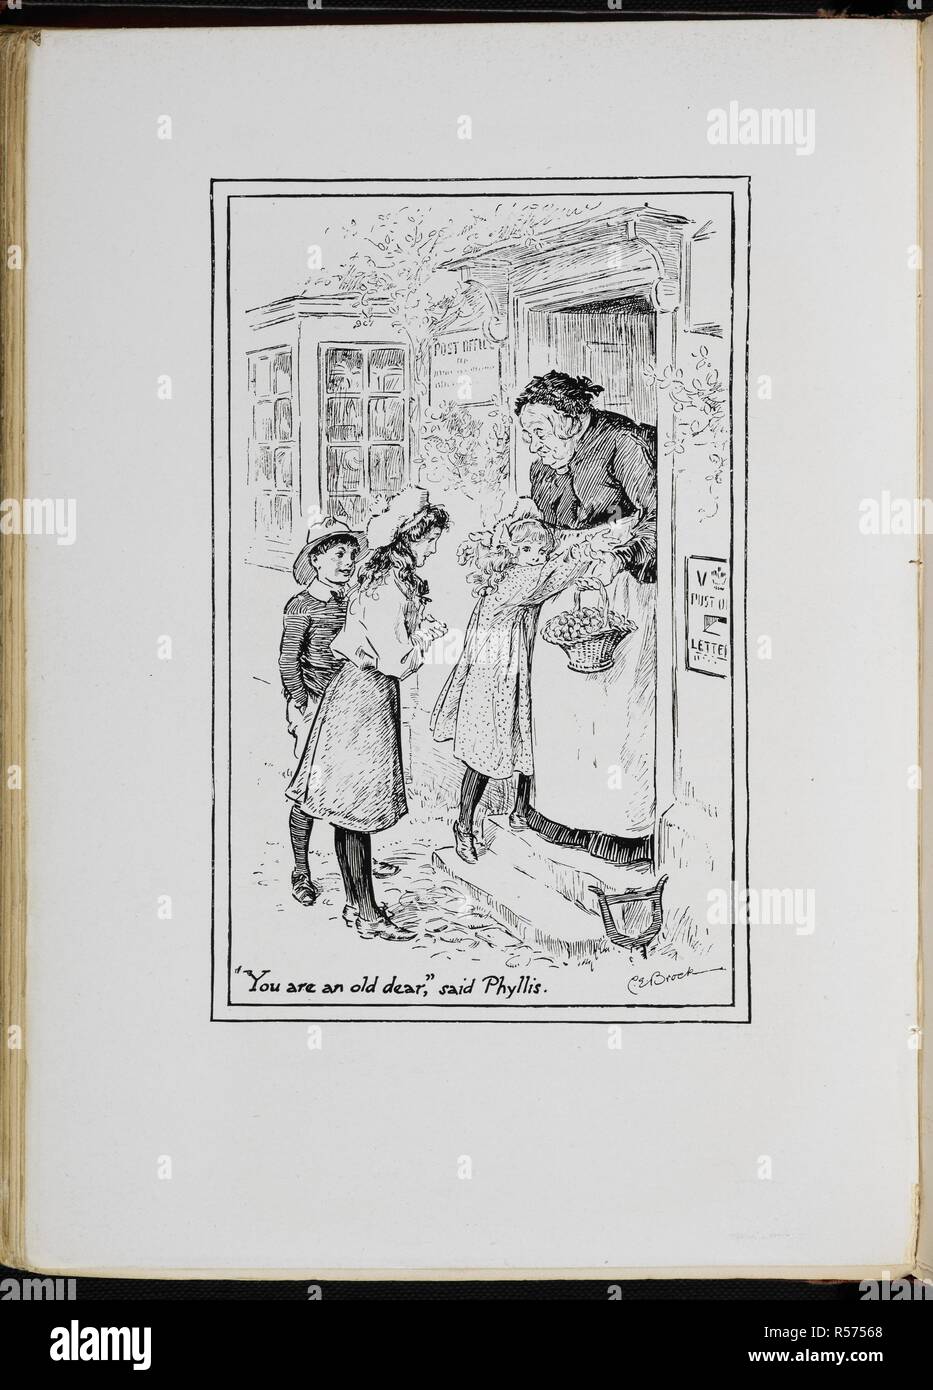 'You are an old dear, '.said Phyllis. The Railway Children With drawings by C E Brock. London : Wells Gardner & Co., 1906. Source: 12813.y.7. Language: English. Author: Brock, Charles Edmund. Nesbit, afterwards Bland, Edith. Stock Photo